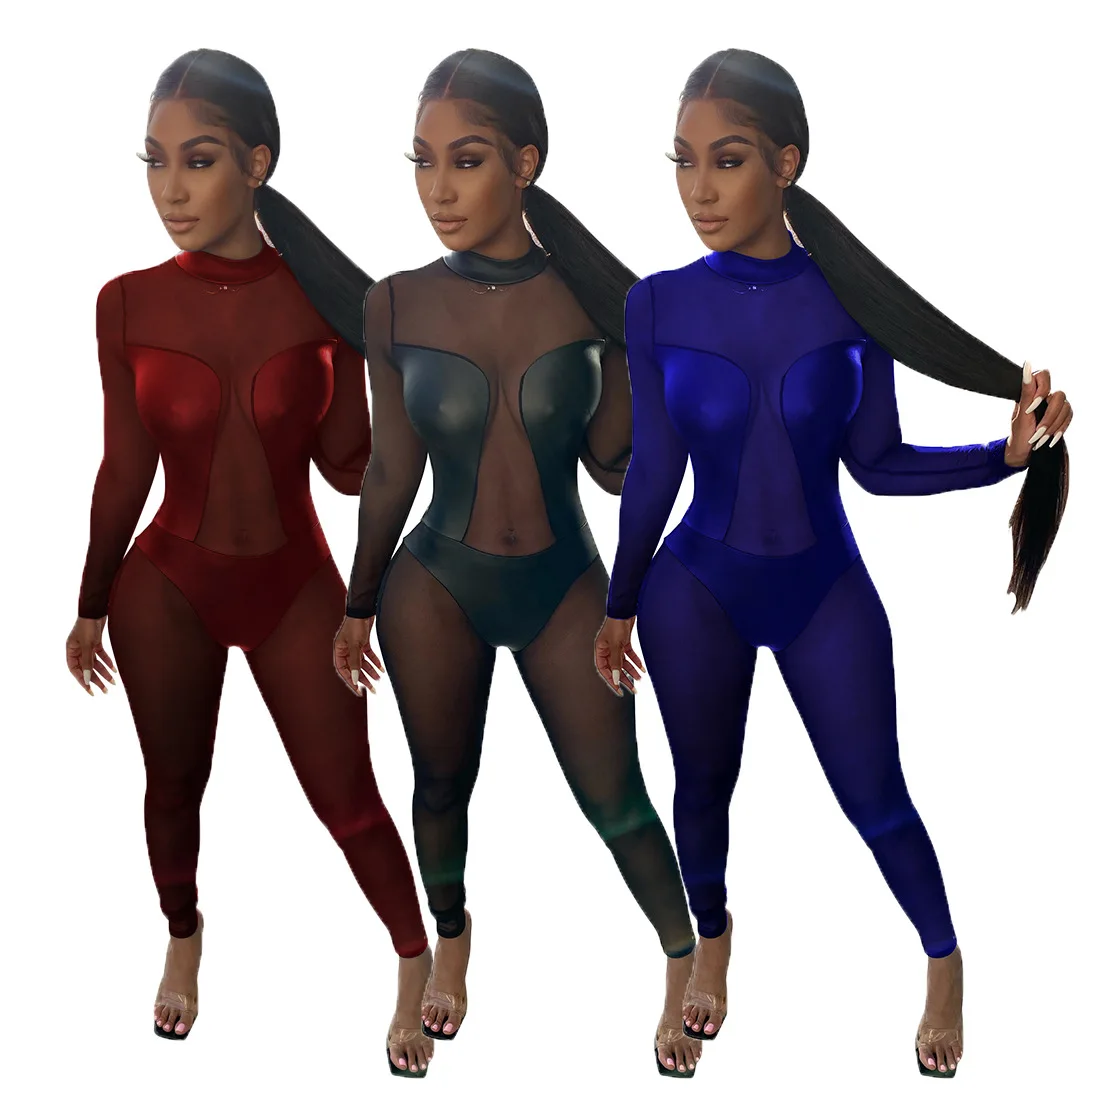 

Mesh Jumpsuit Women Black Blue Burgundy Sheer See Through Jumpsuit for Women Ladies Bodycon Party Club Clubwear Mono Mujer 2021